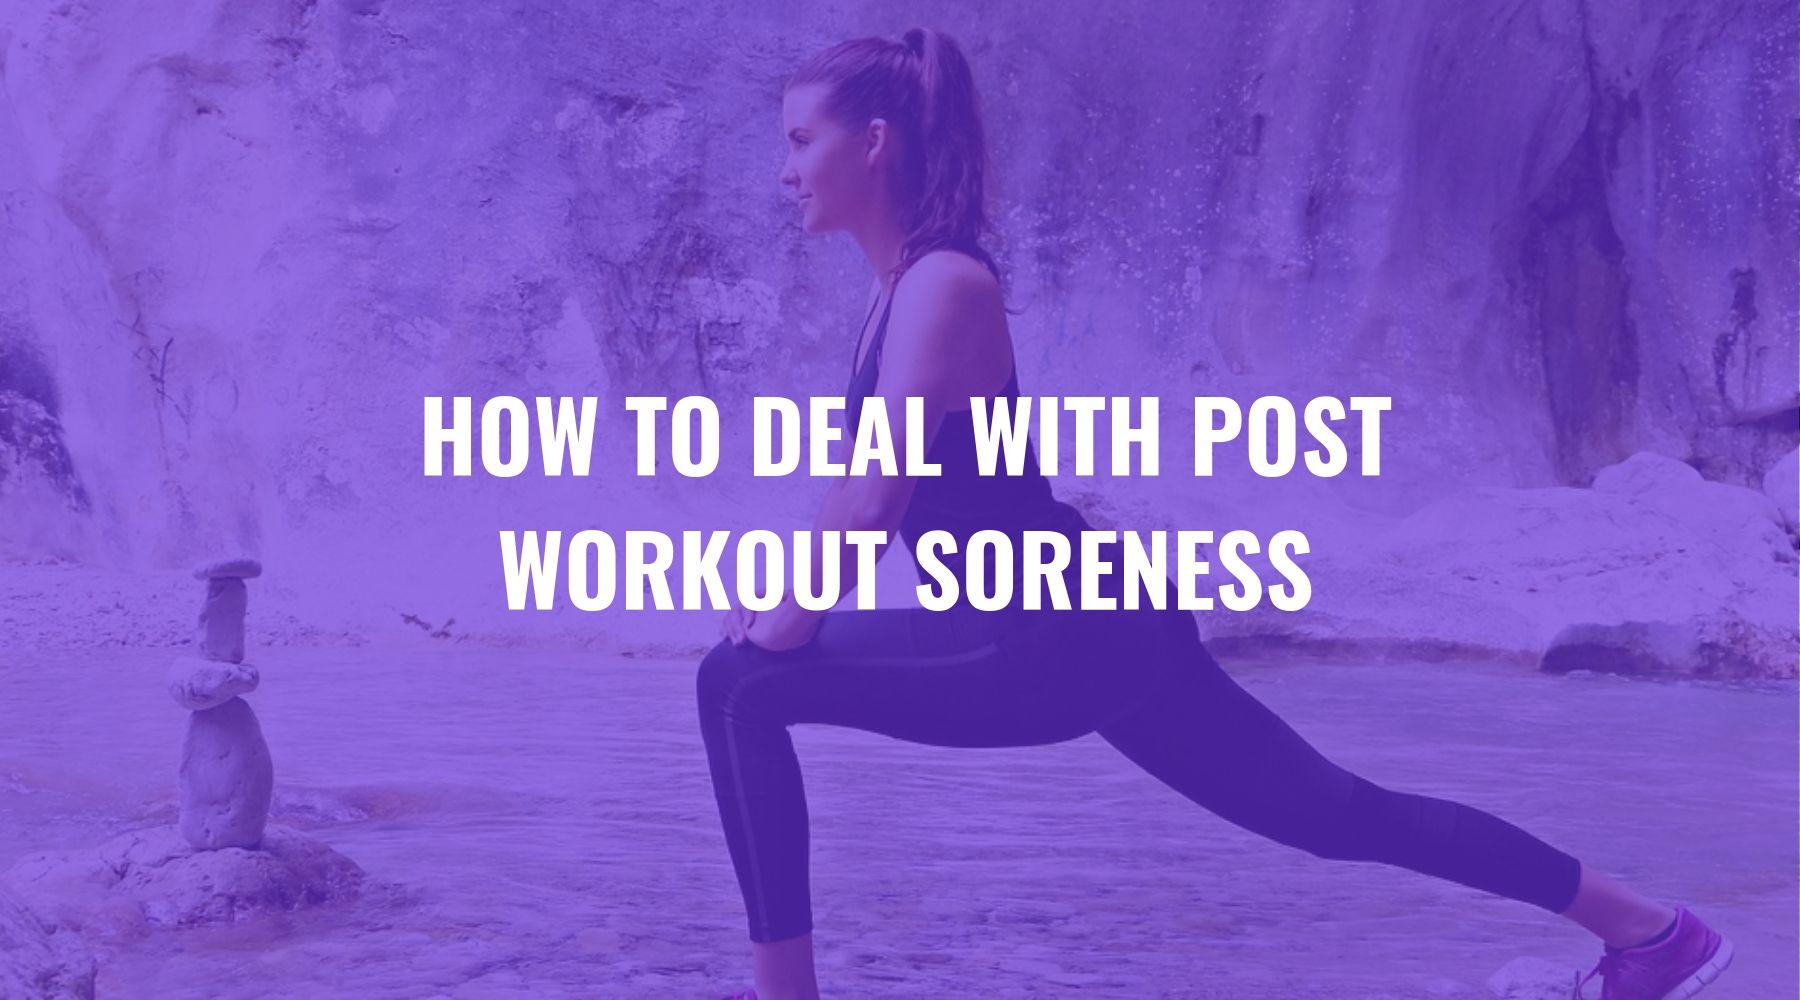 How to Deal with Post Workout Soreness